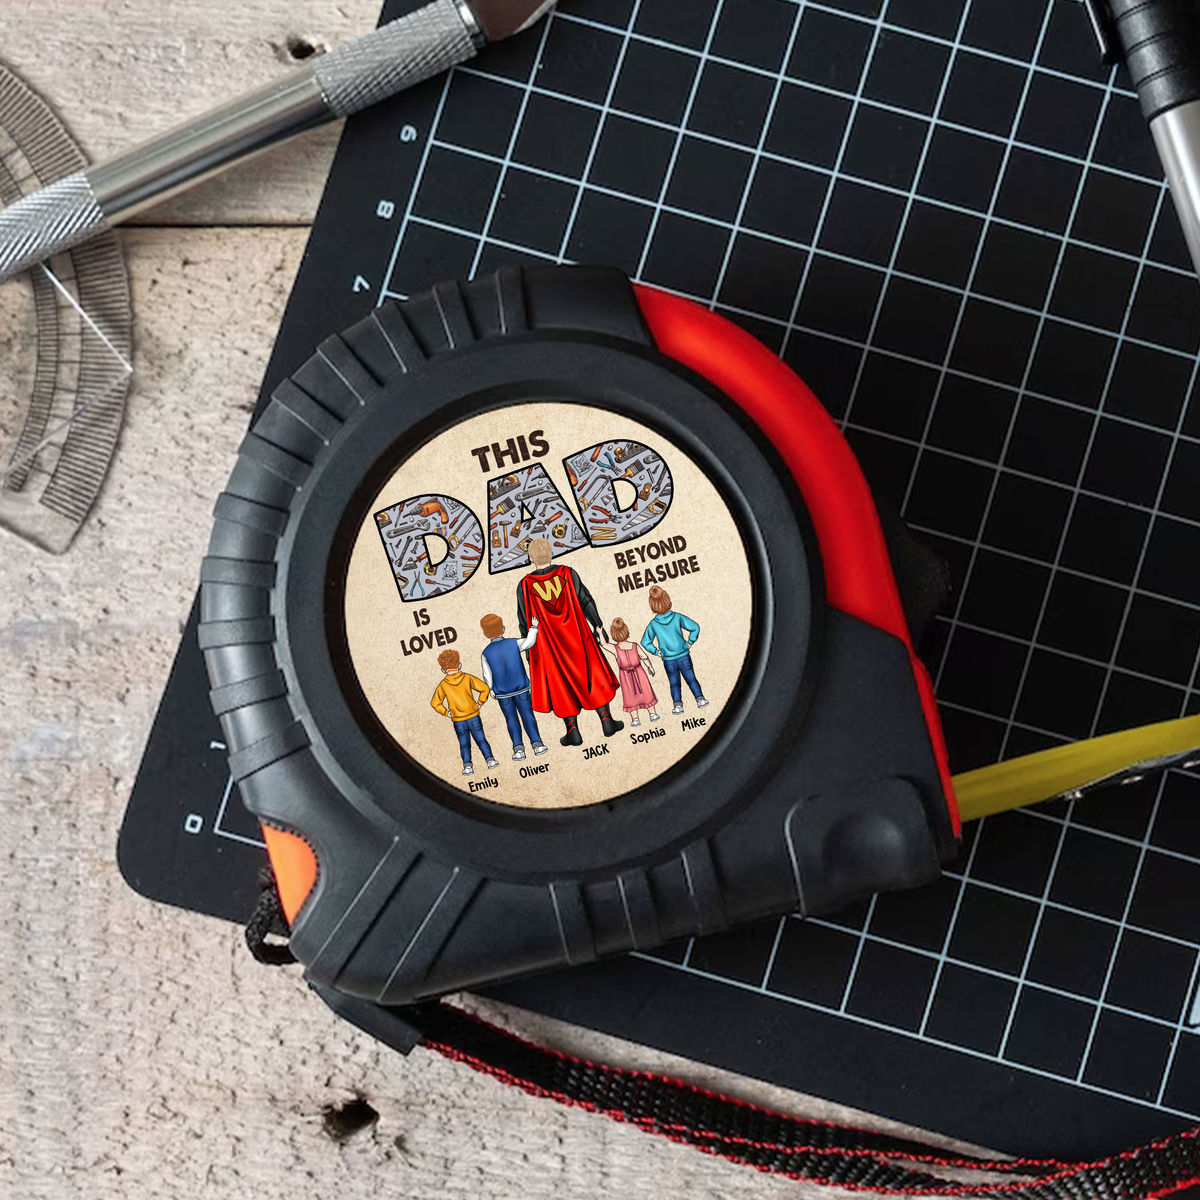 Personalized Tape Measure - This DAD is Loved Beyond Measure - Super Handyman_3